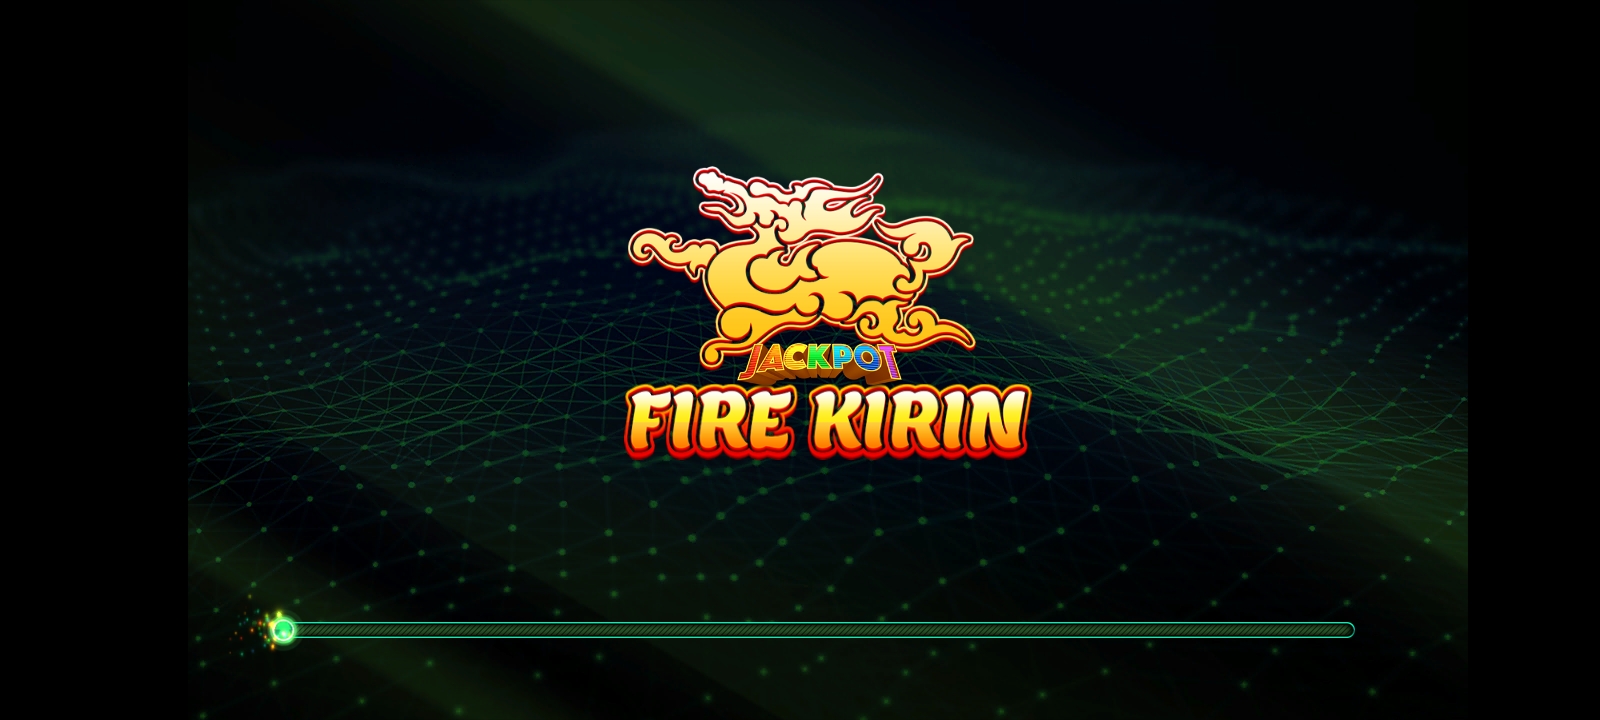 Fire Kirin Apk Free Download For Android [Earn Online Money]